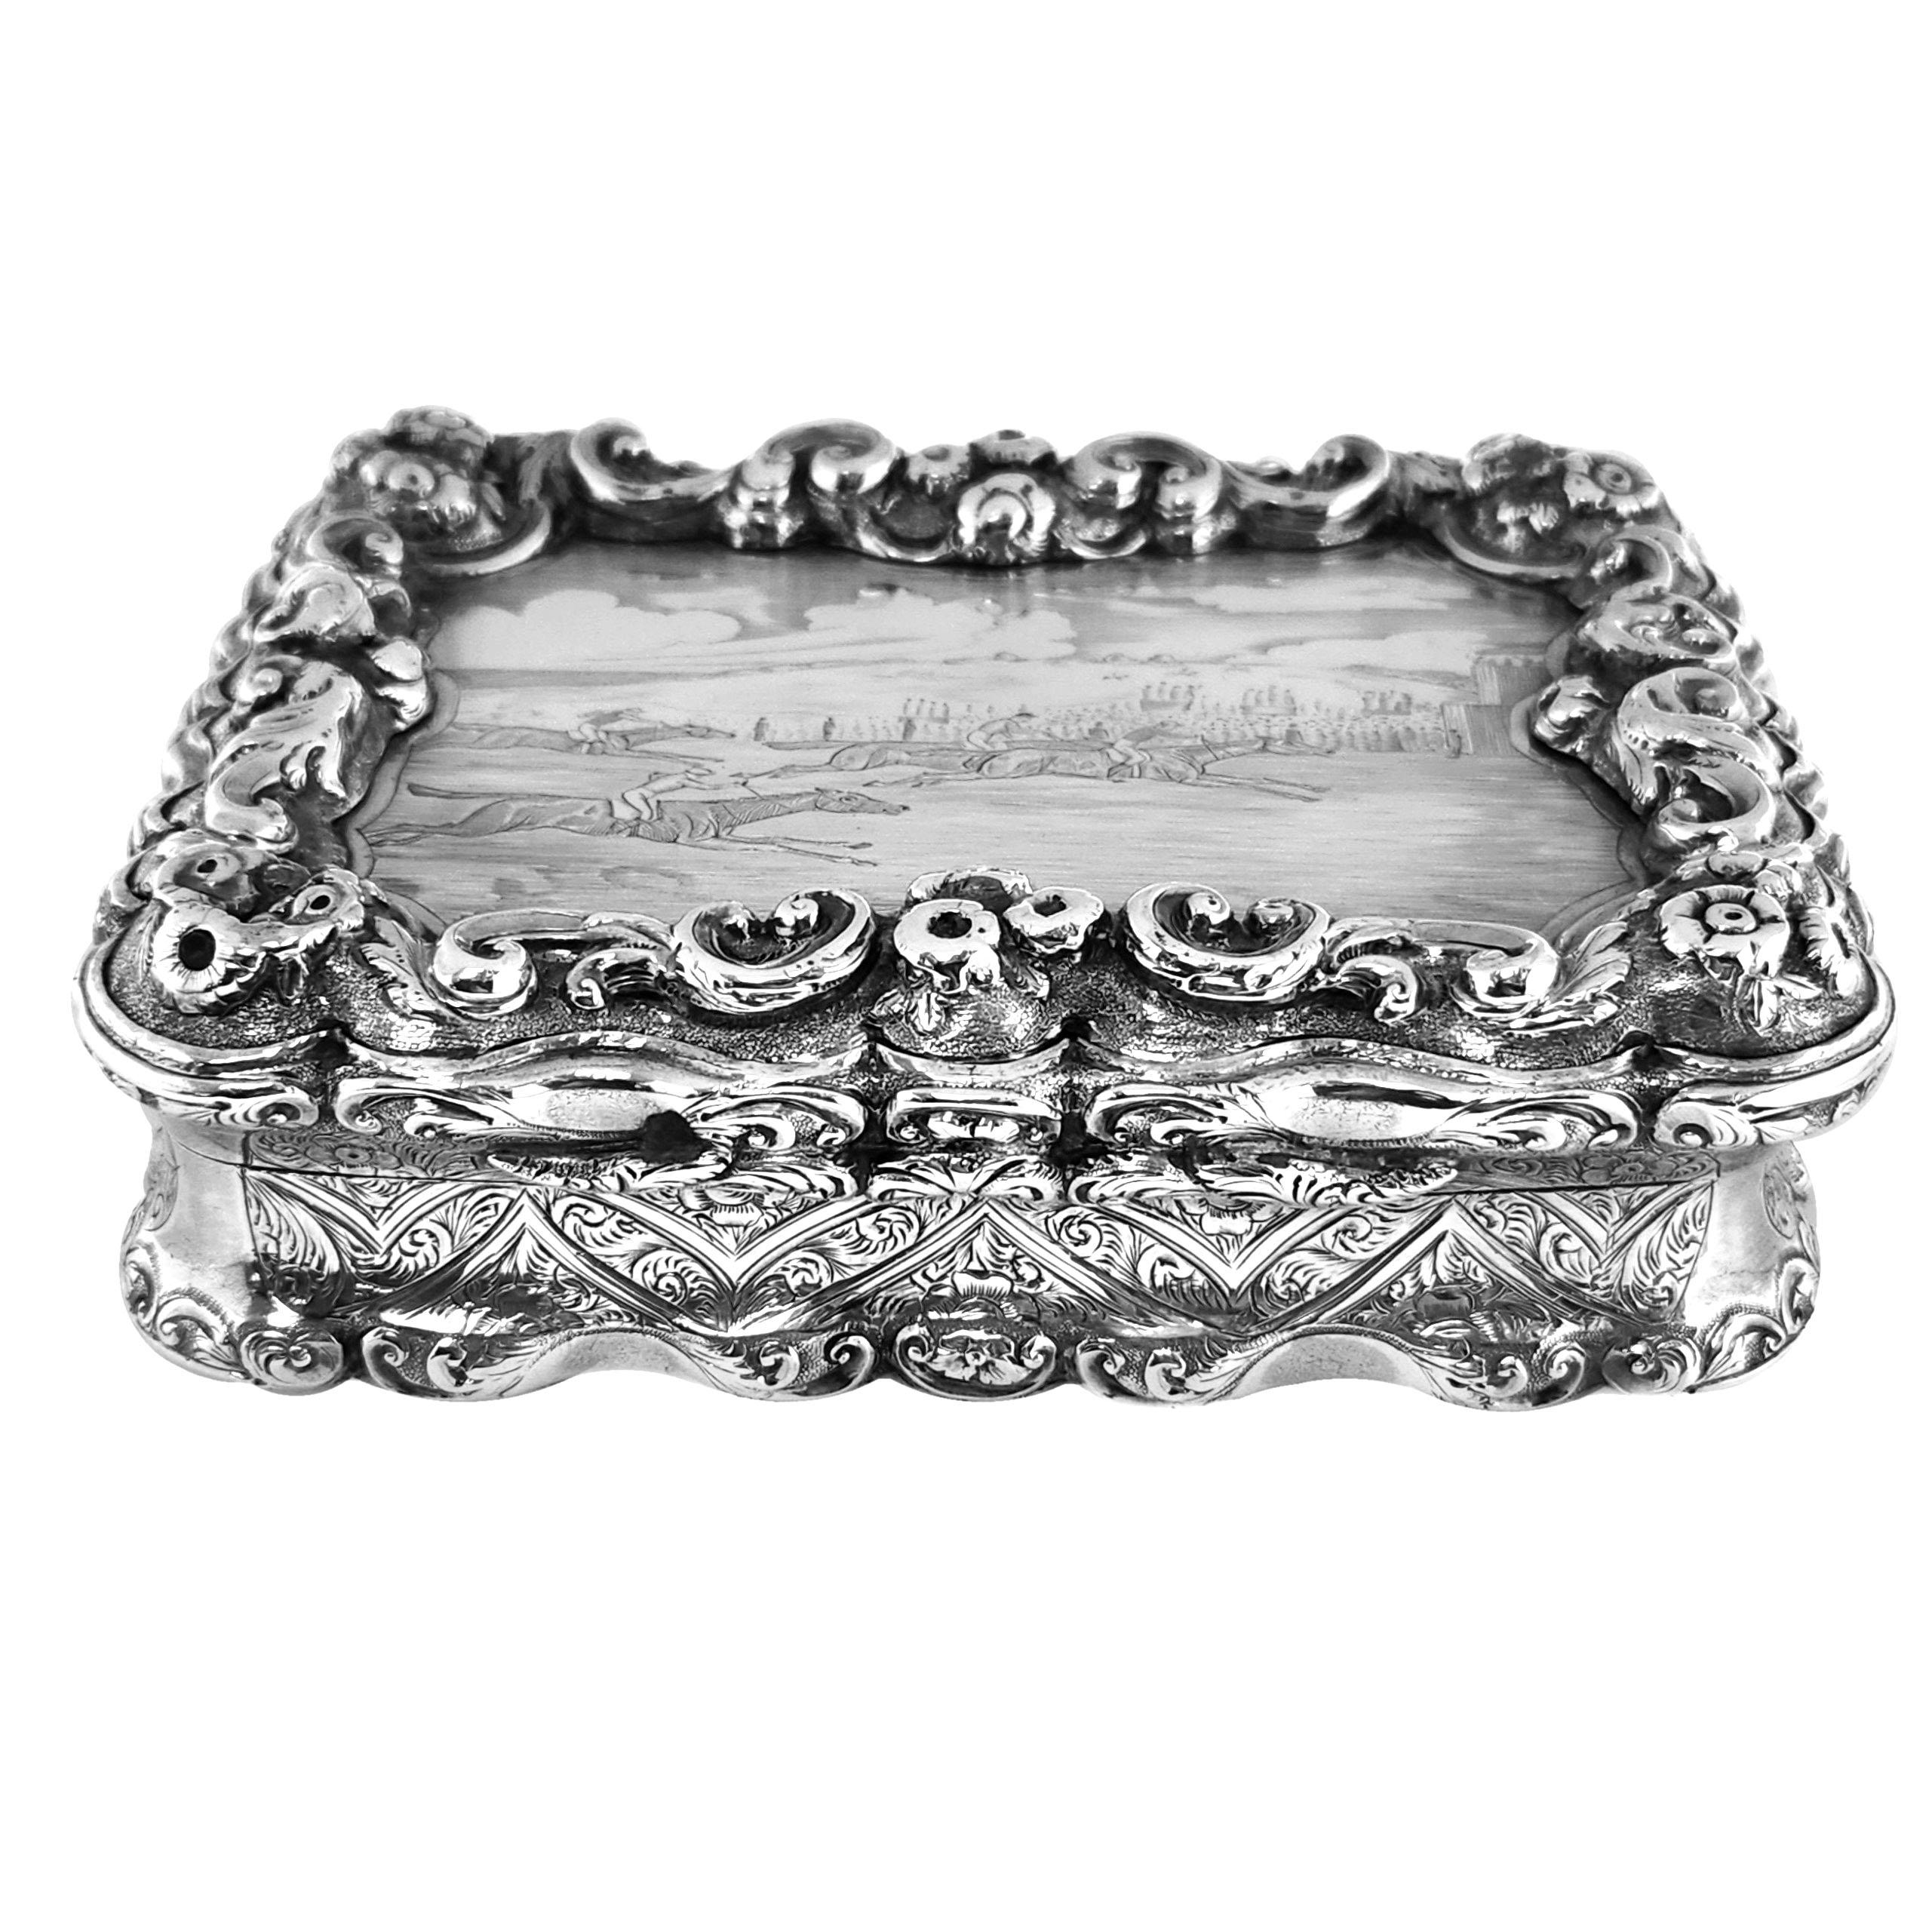 English Antique Victorian Silver Decorative Table Snuff Box 1861 Horse Racing For Sale